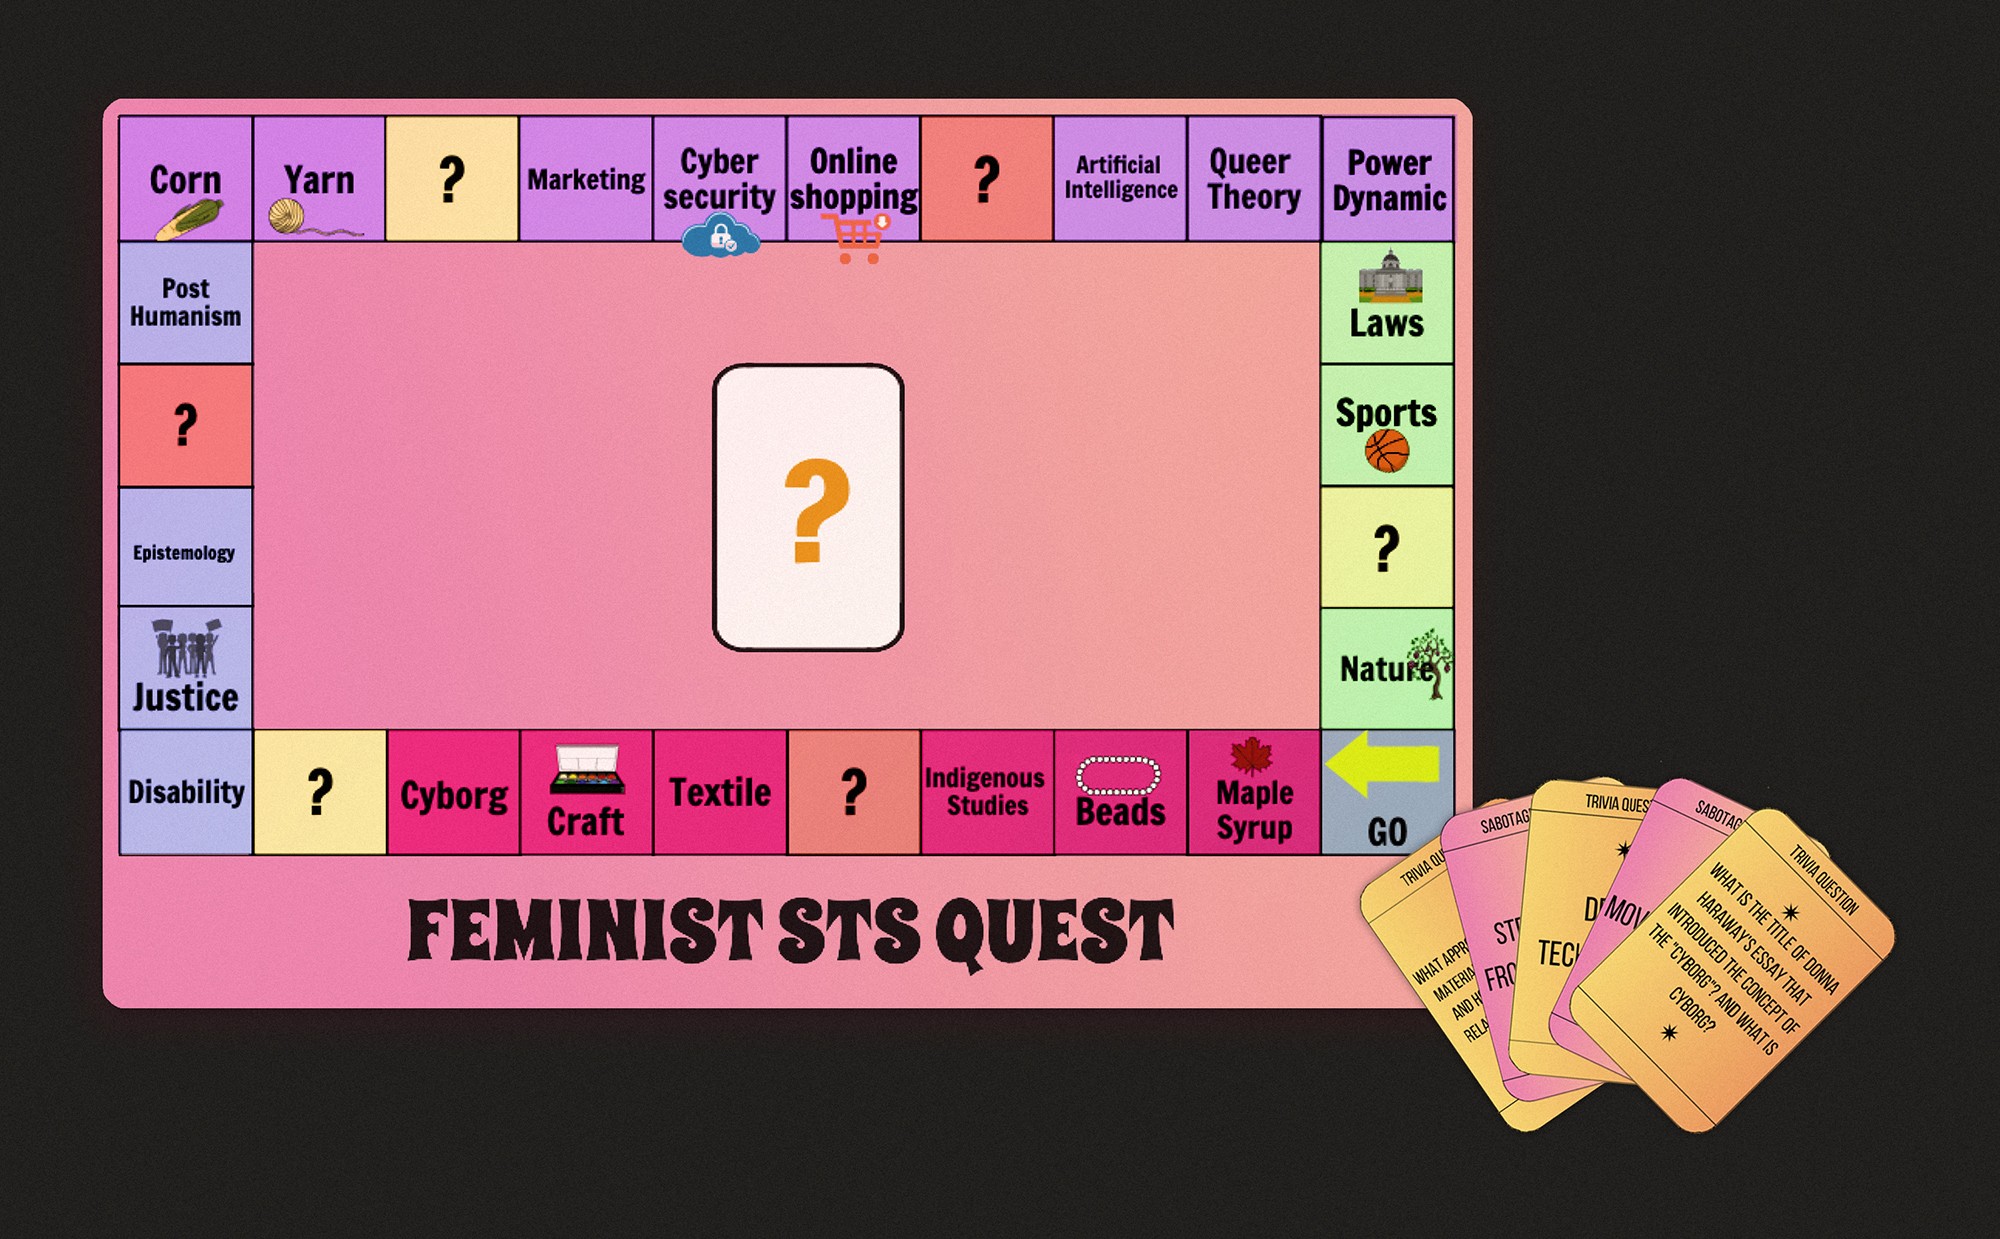 “Feminist STS Quest” board game by Ravraj Gill